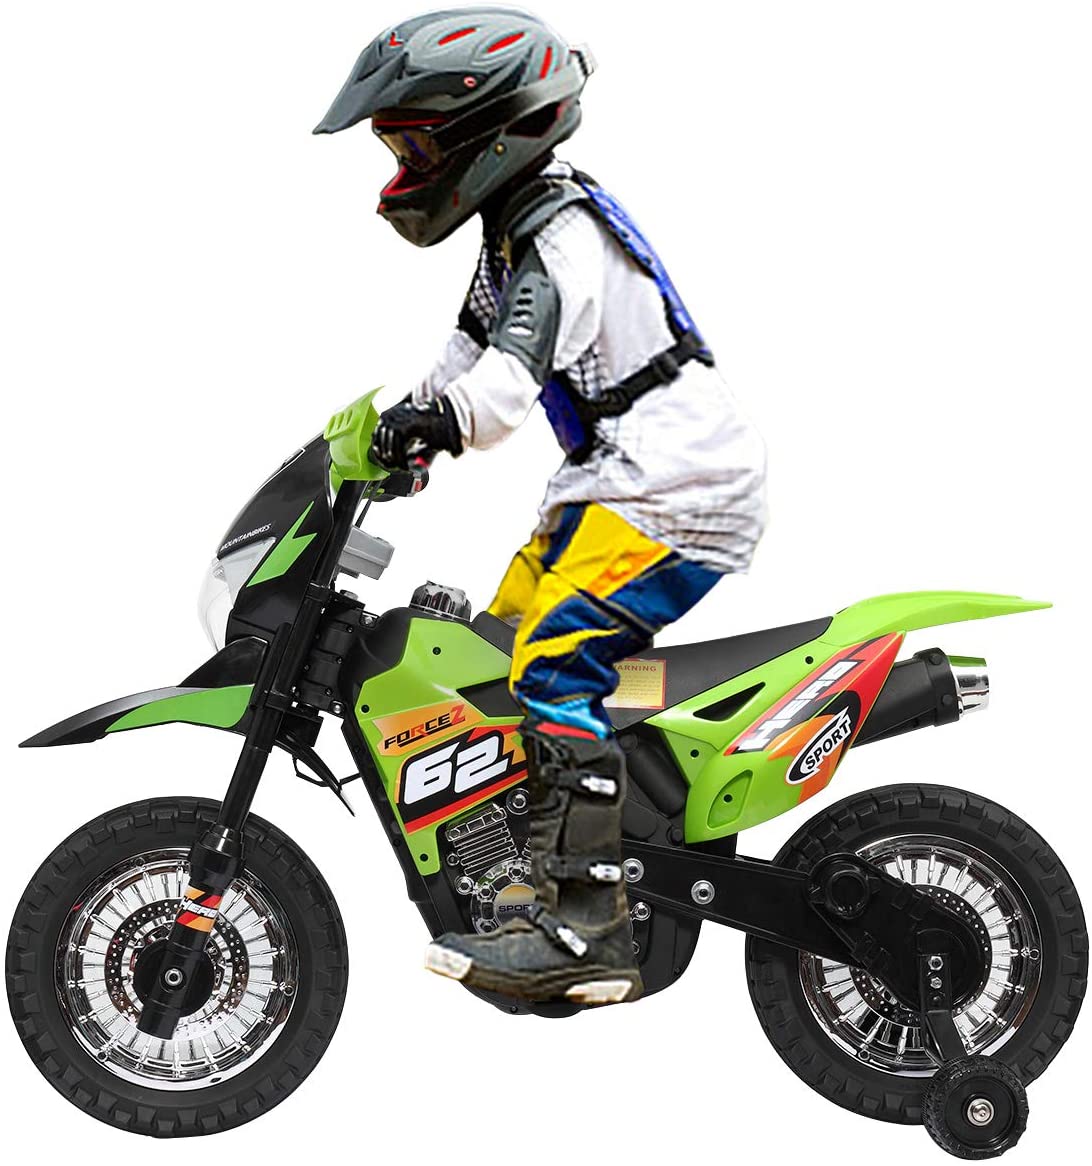 Top 10 Best Electric Motorcycles for Kids of [year] - Buying Guide 1